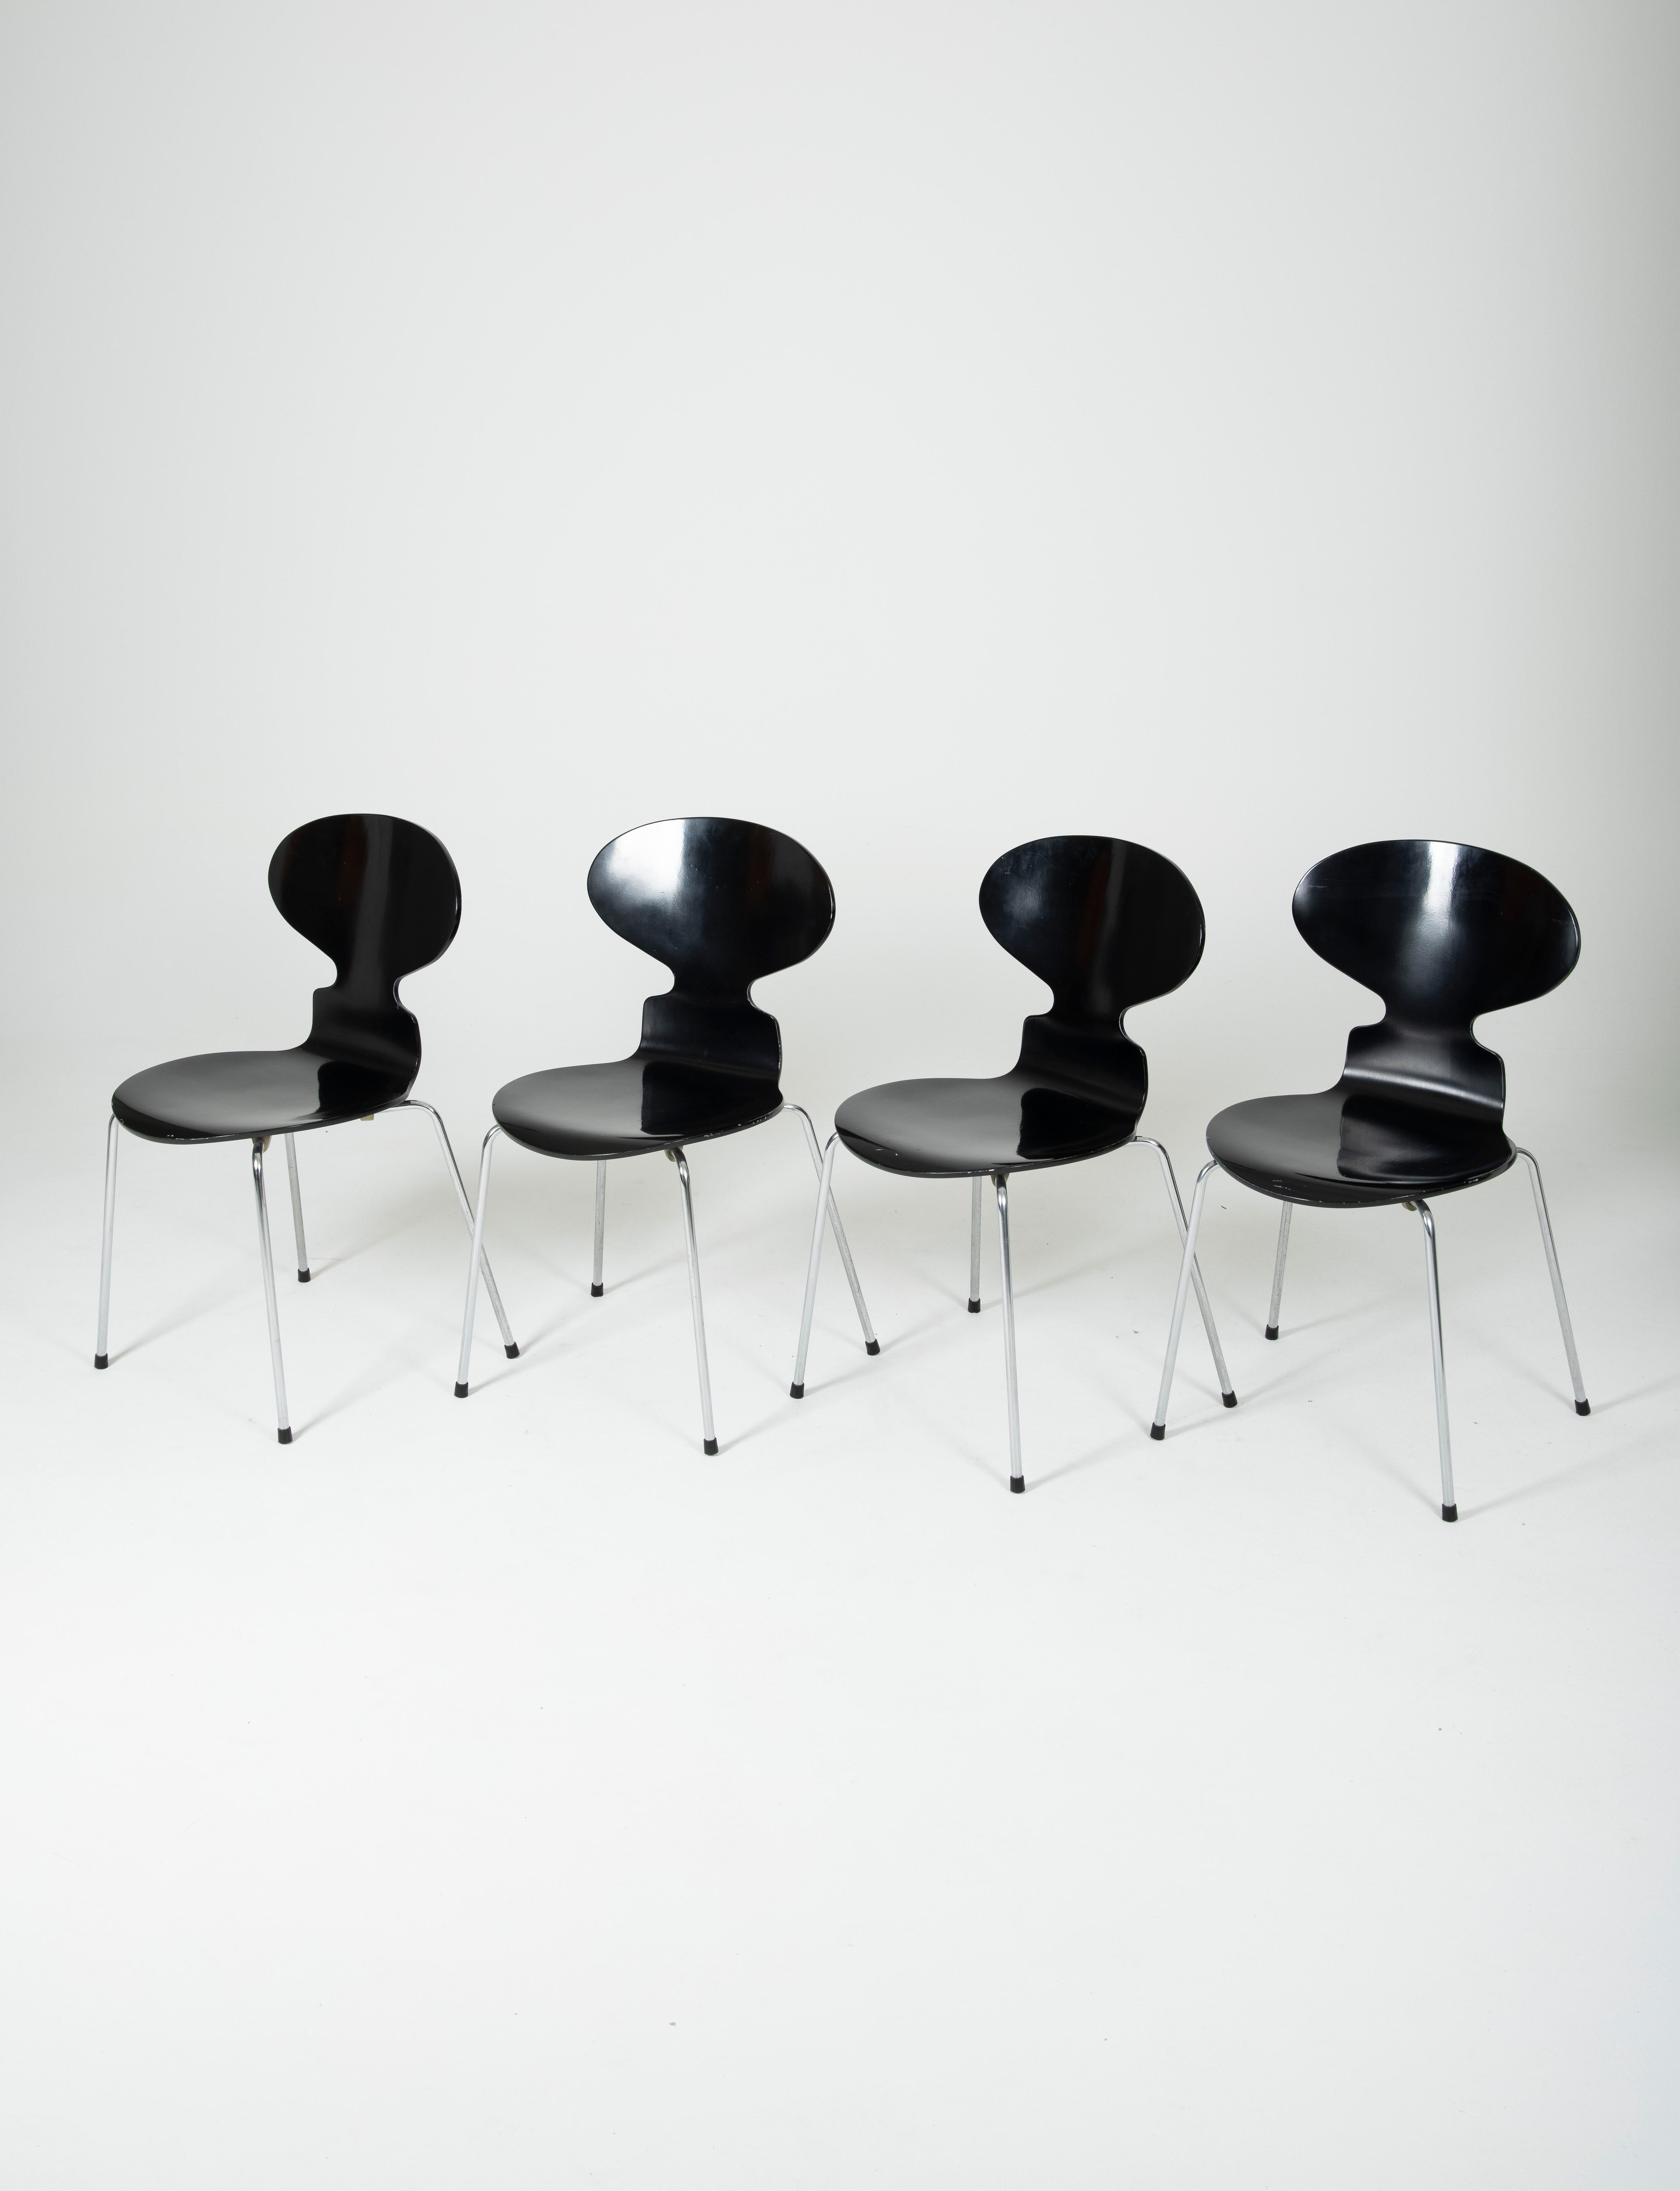 Set of 4 ant chairs model 3101 by Arne Jacobsen for the publisher Fritz Hansen 